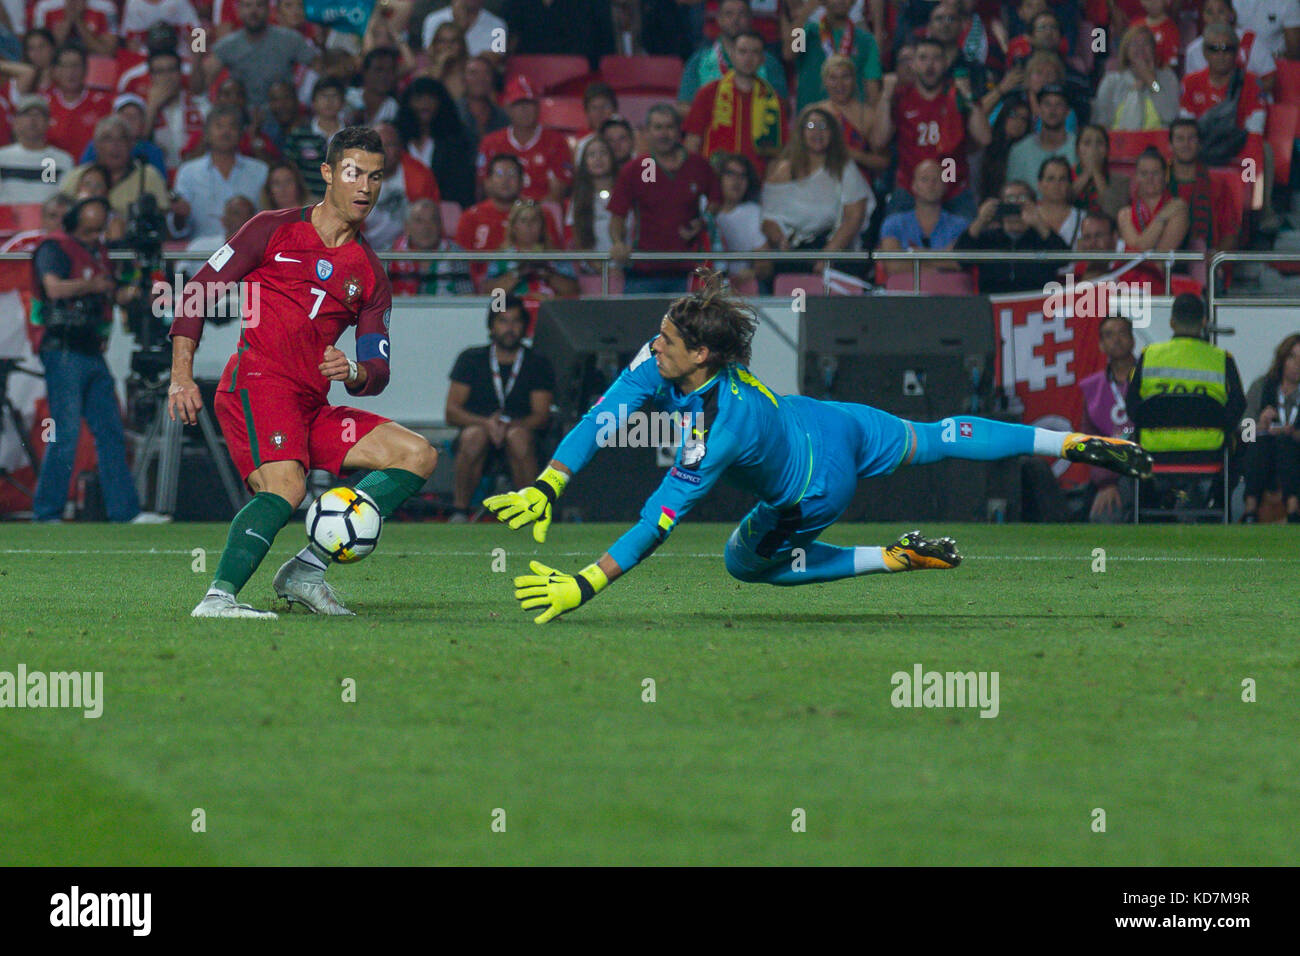 Lisbon, Portugal. 10th Oct, 2017. Portugal's forward Cristiano Ronaldo (7) and Switzerland's goalkeeper Yann Sommer (1) during the FIFA 2018 World Cup Qualifier between Portugal and Switzerland Credit: Alexandre de Sousa/Alamy Live News Stock Photo